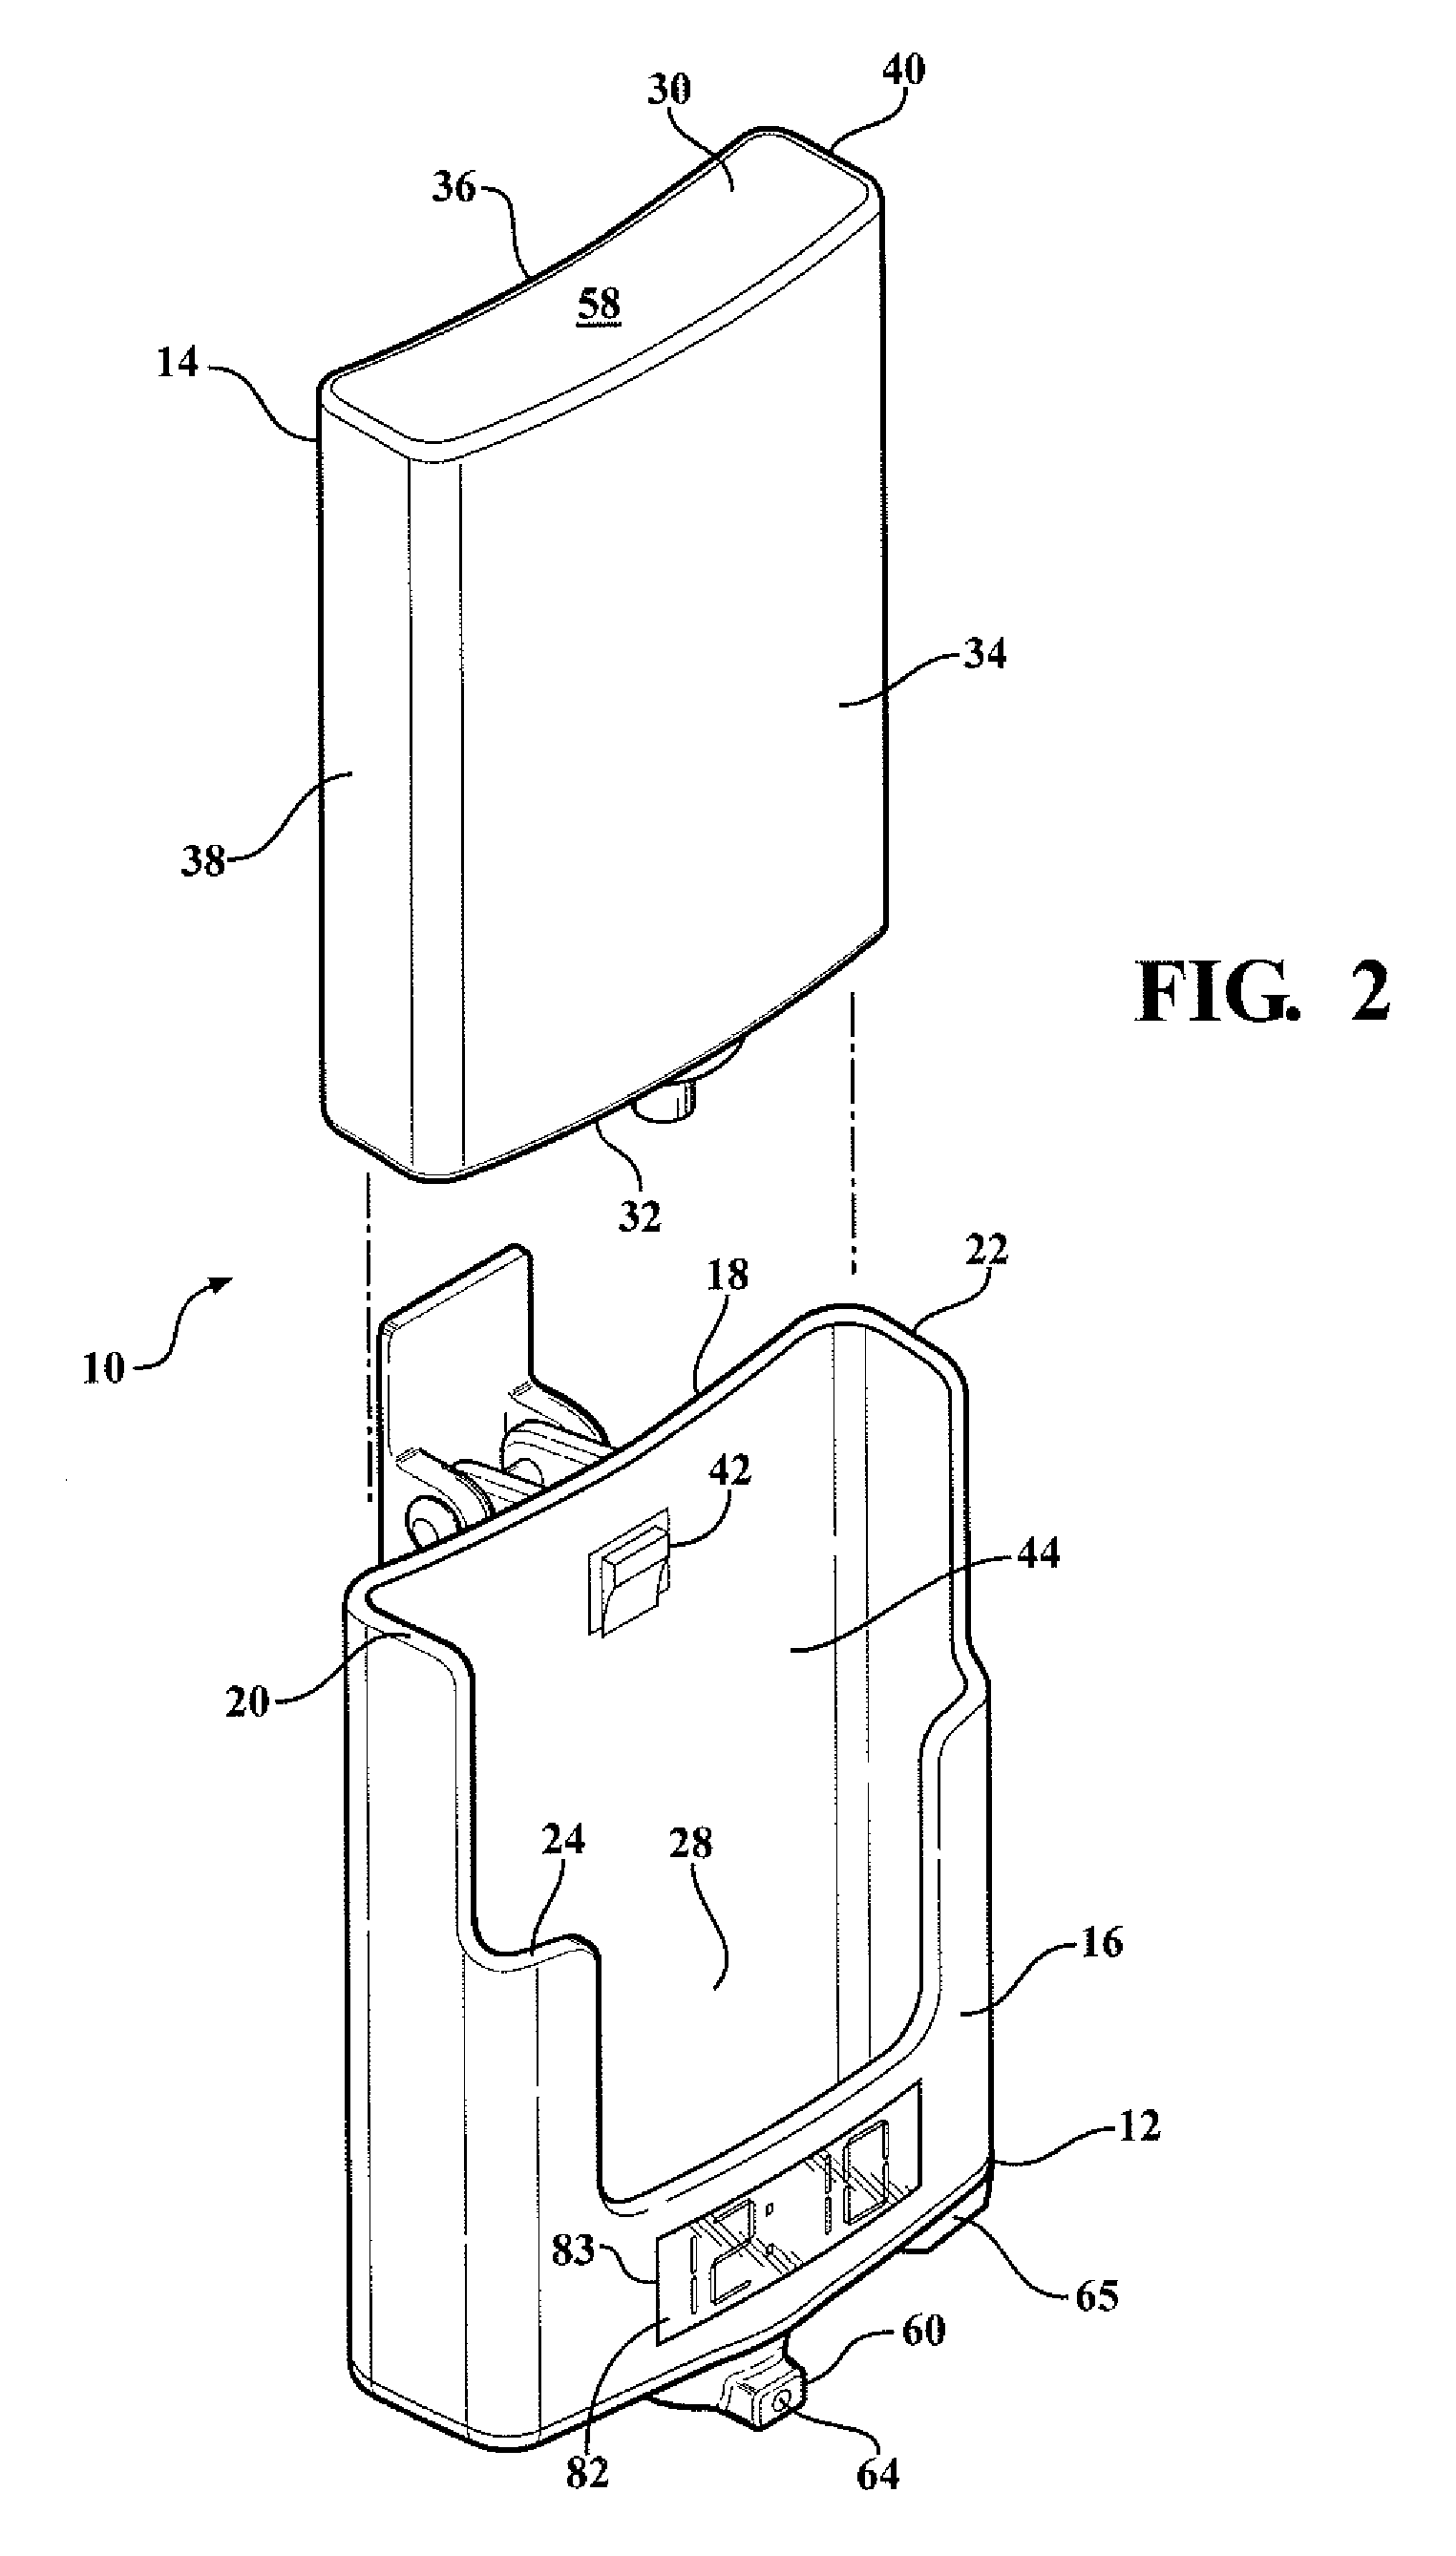 Dispenser assembly for dispensing disinfectant fluid and data collection and monitoring system for monitoring and reporting dispensing events